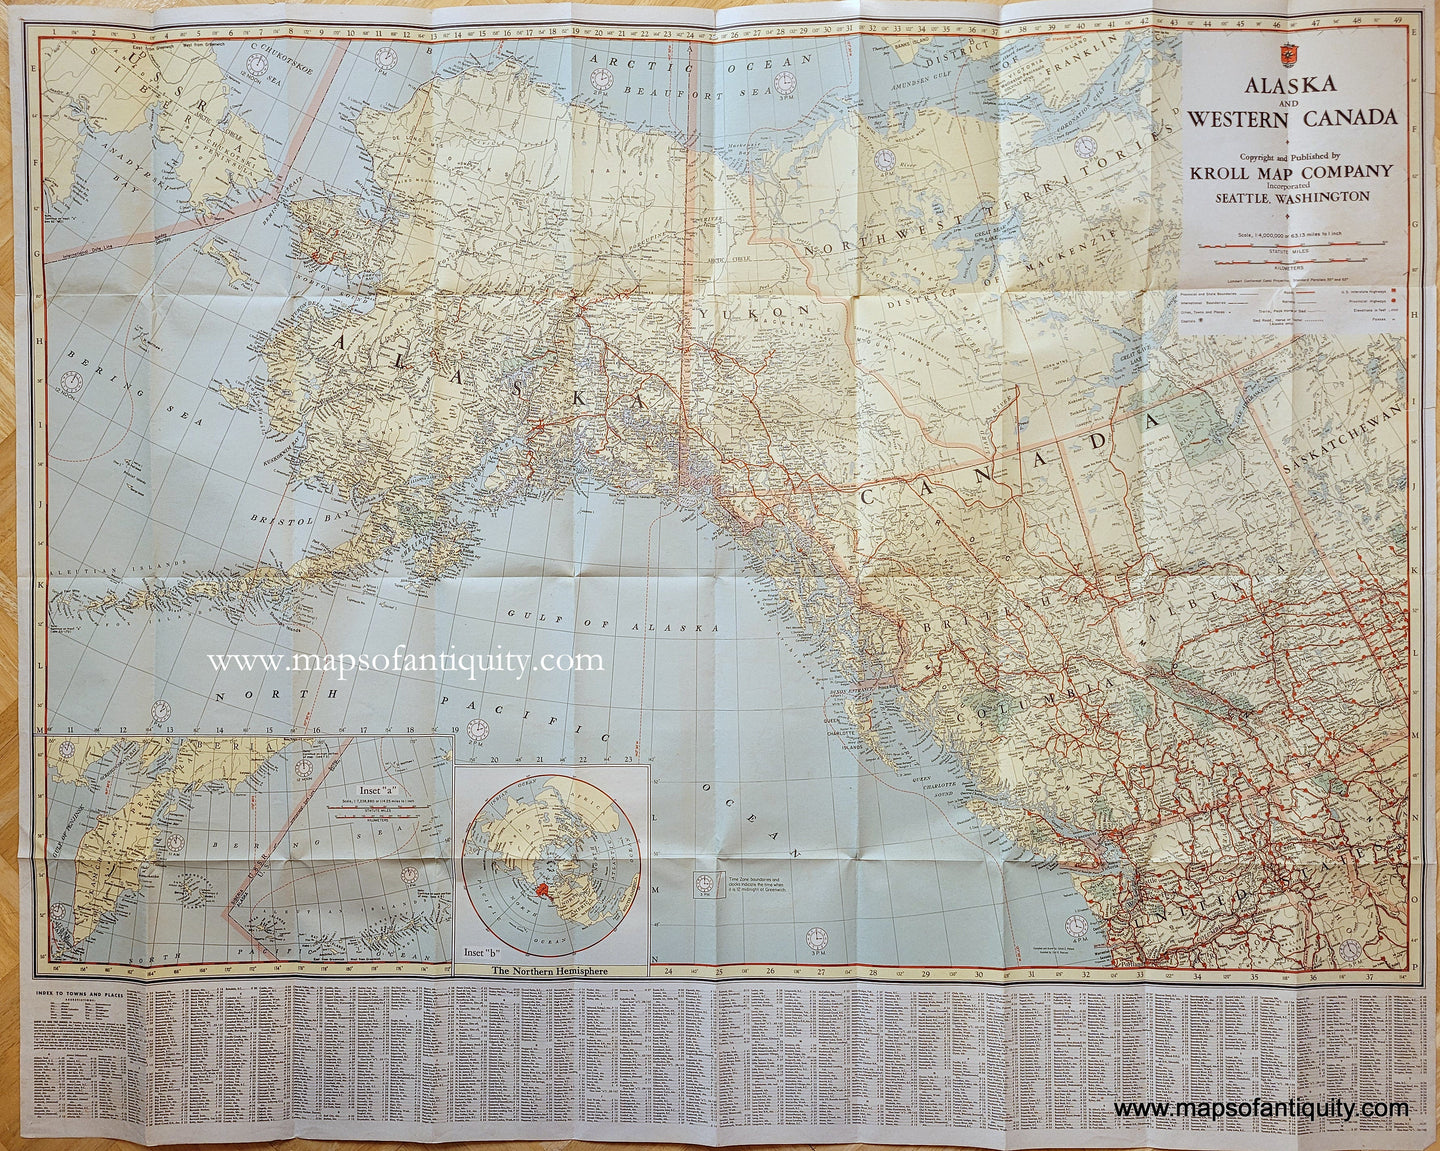 Genuine-Map-Alaska-and-Western-Canada-1950s-Kroll-Map-Company-Maps-Of-Antiquity